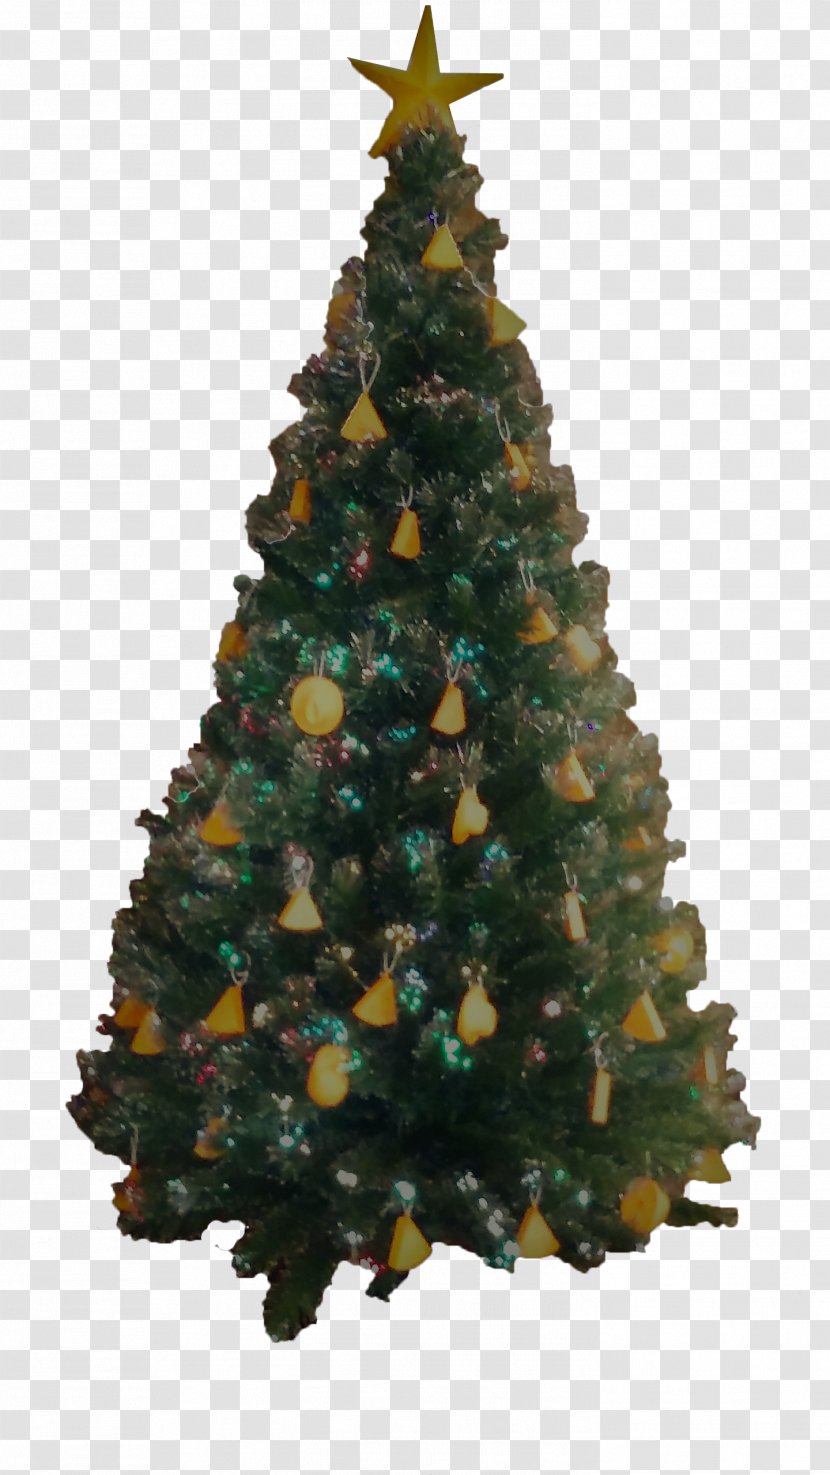 Artificial Christmas Tree Ornament Pre-lit Lights - Norway Spruce Transparent PNG